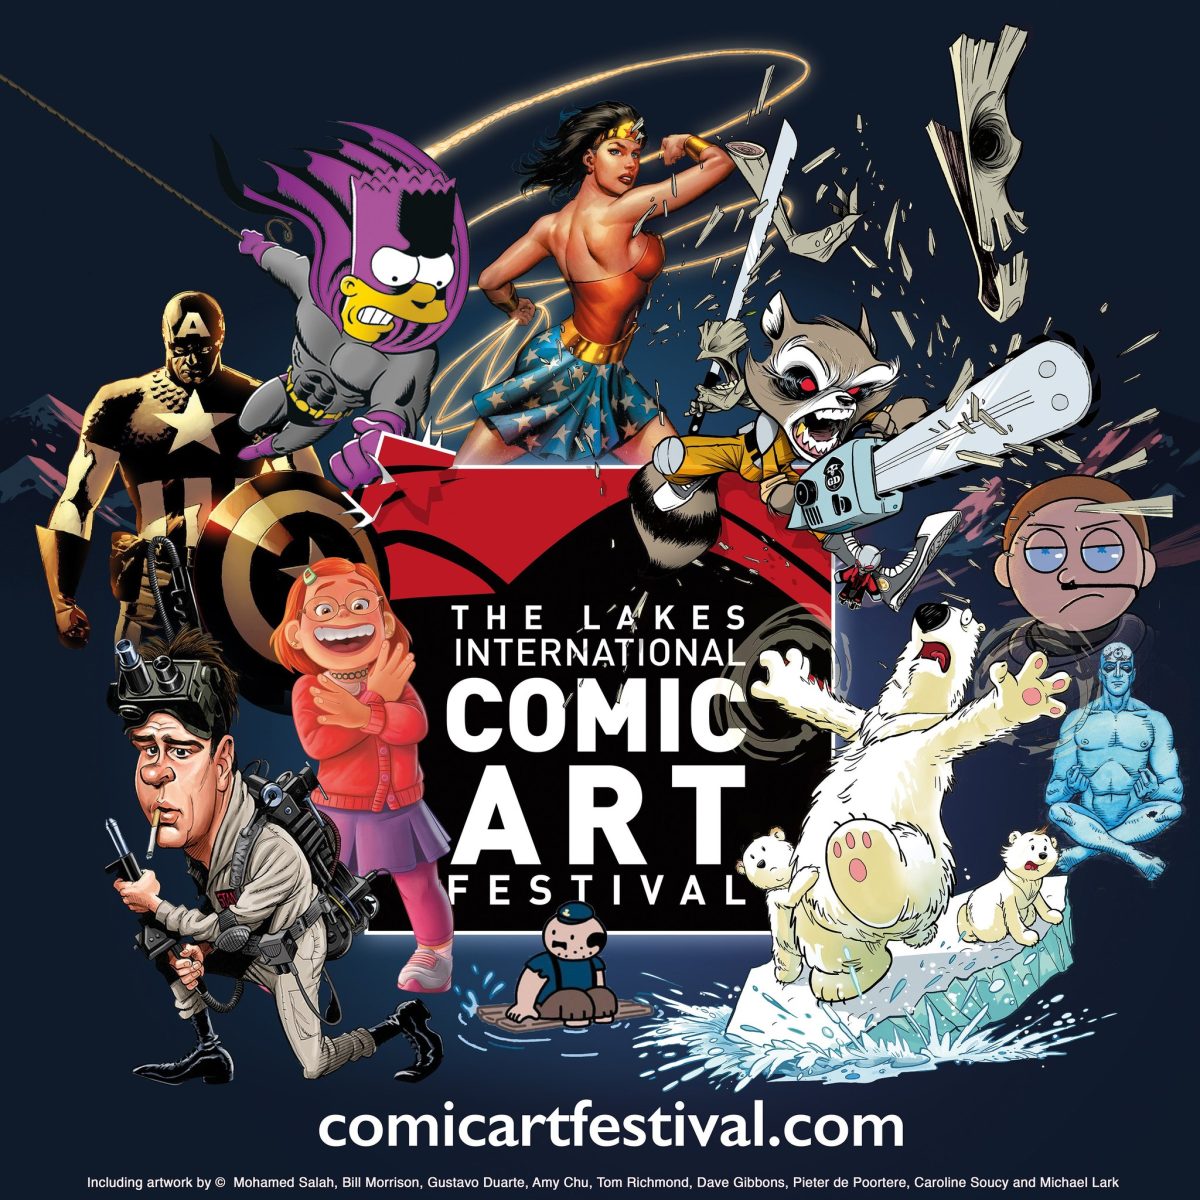 A celebration of comic art from across the world is